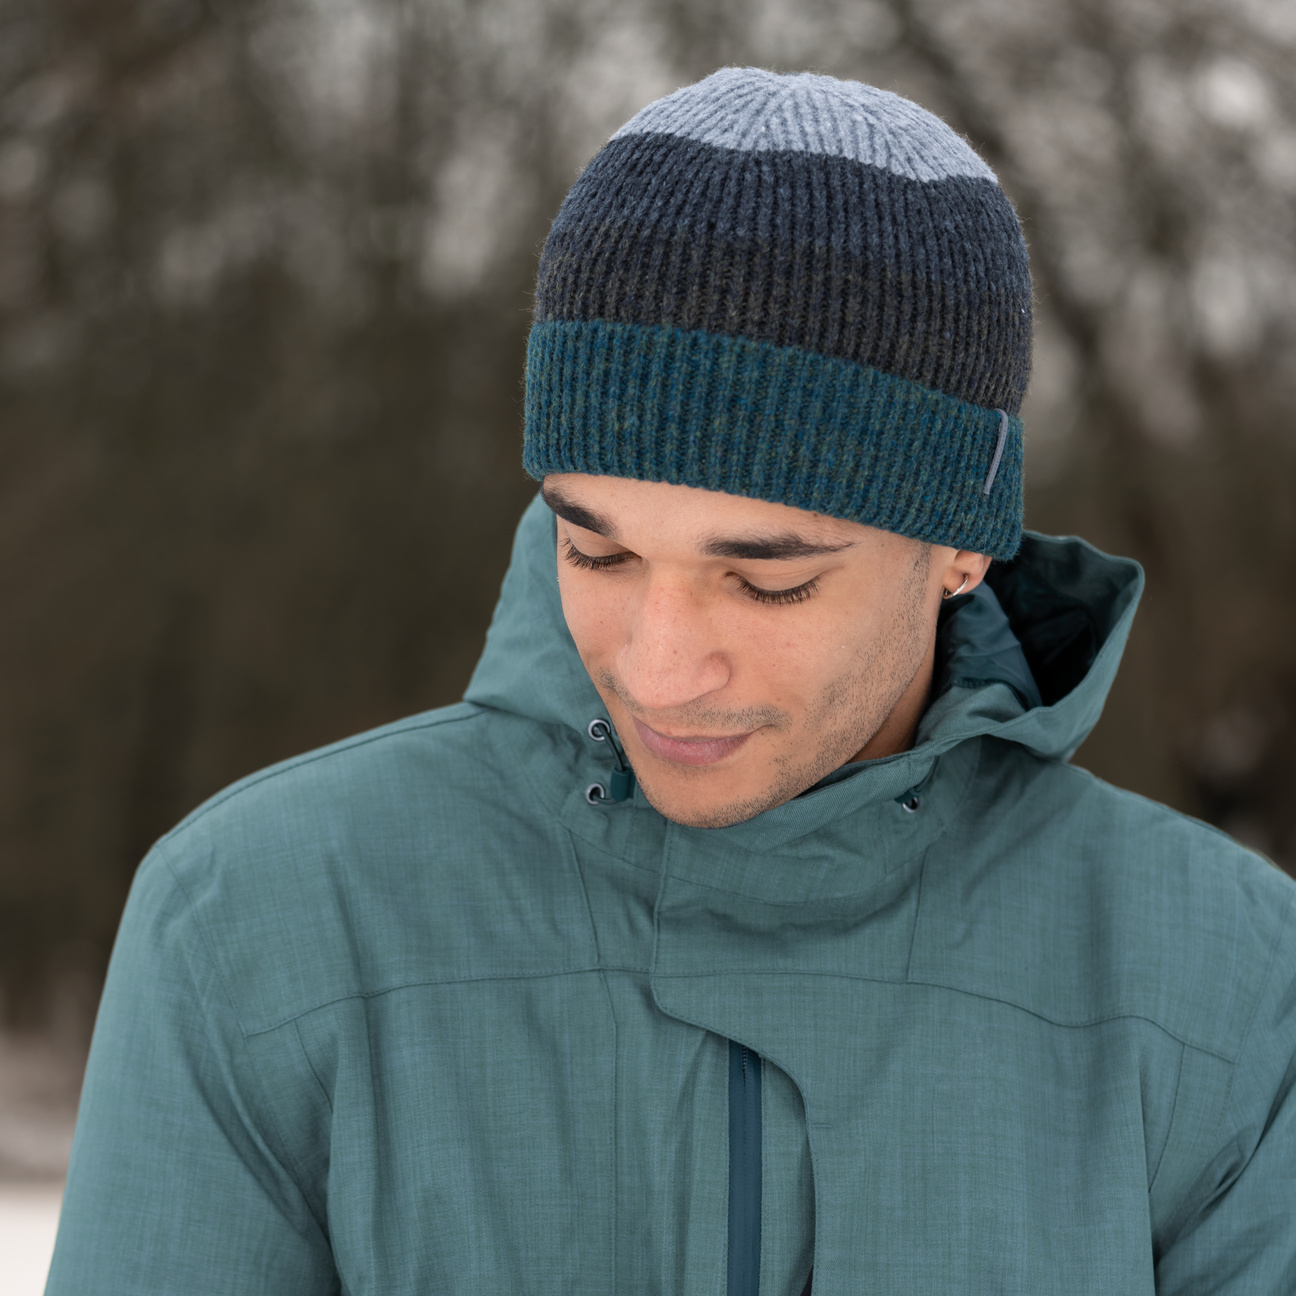 - 24,99 Fritz Beanie by Chillouts €